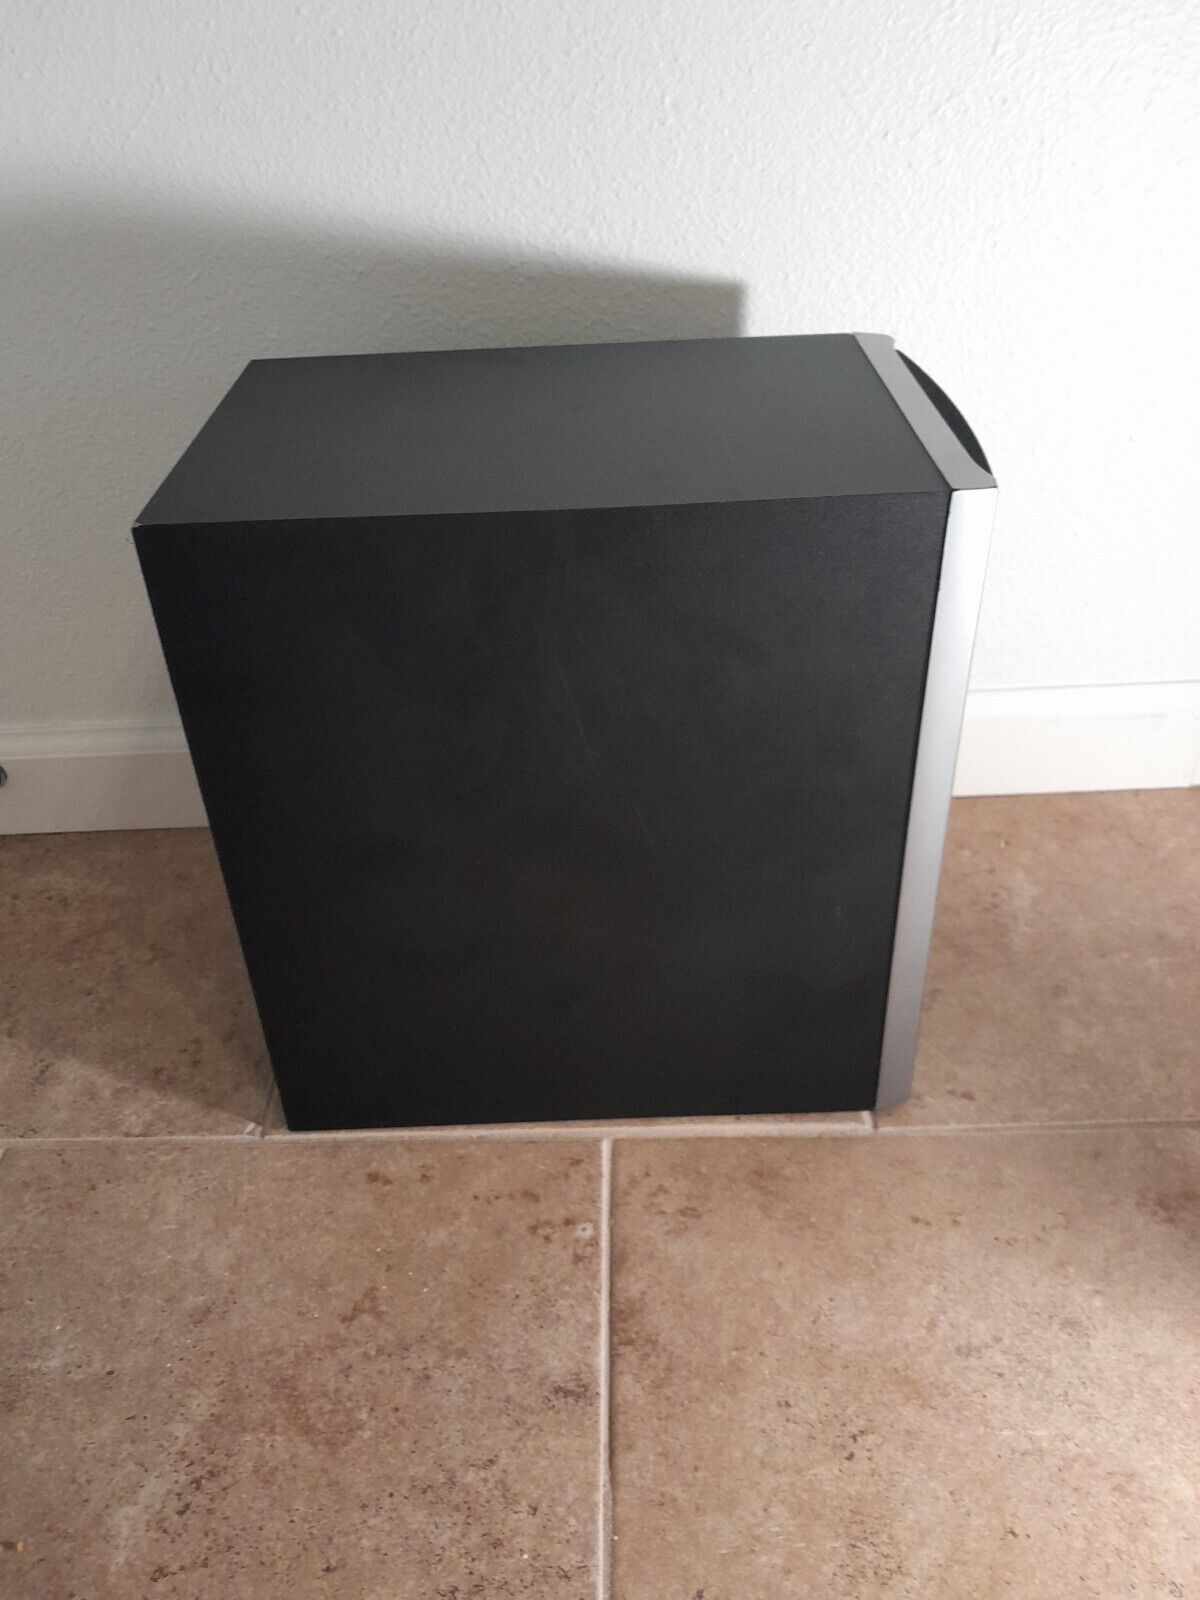 Sony SS-WS80 Passive Home Theater Subwoofer (TESTED/WORKING)